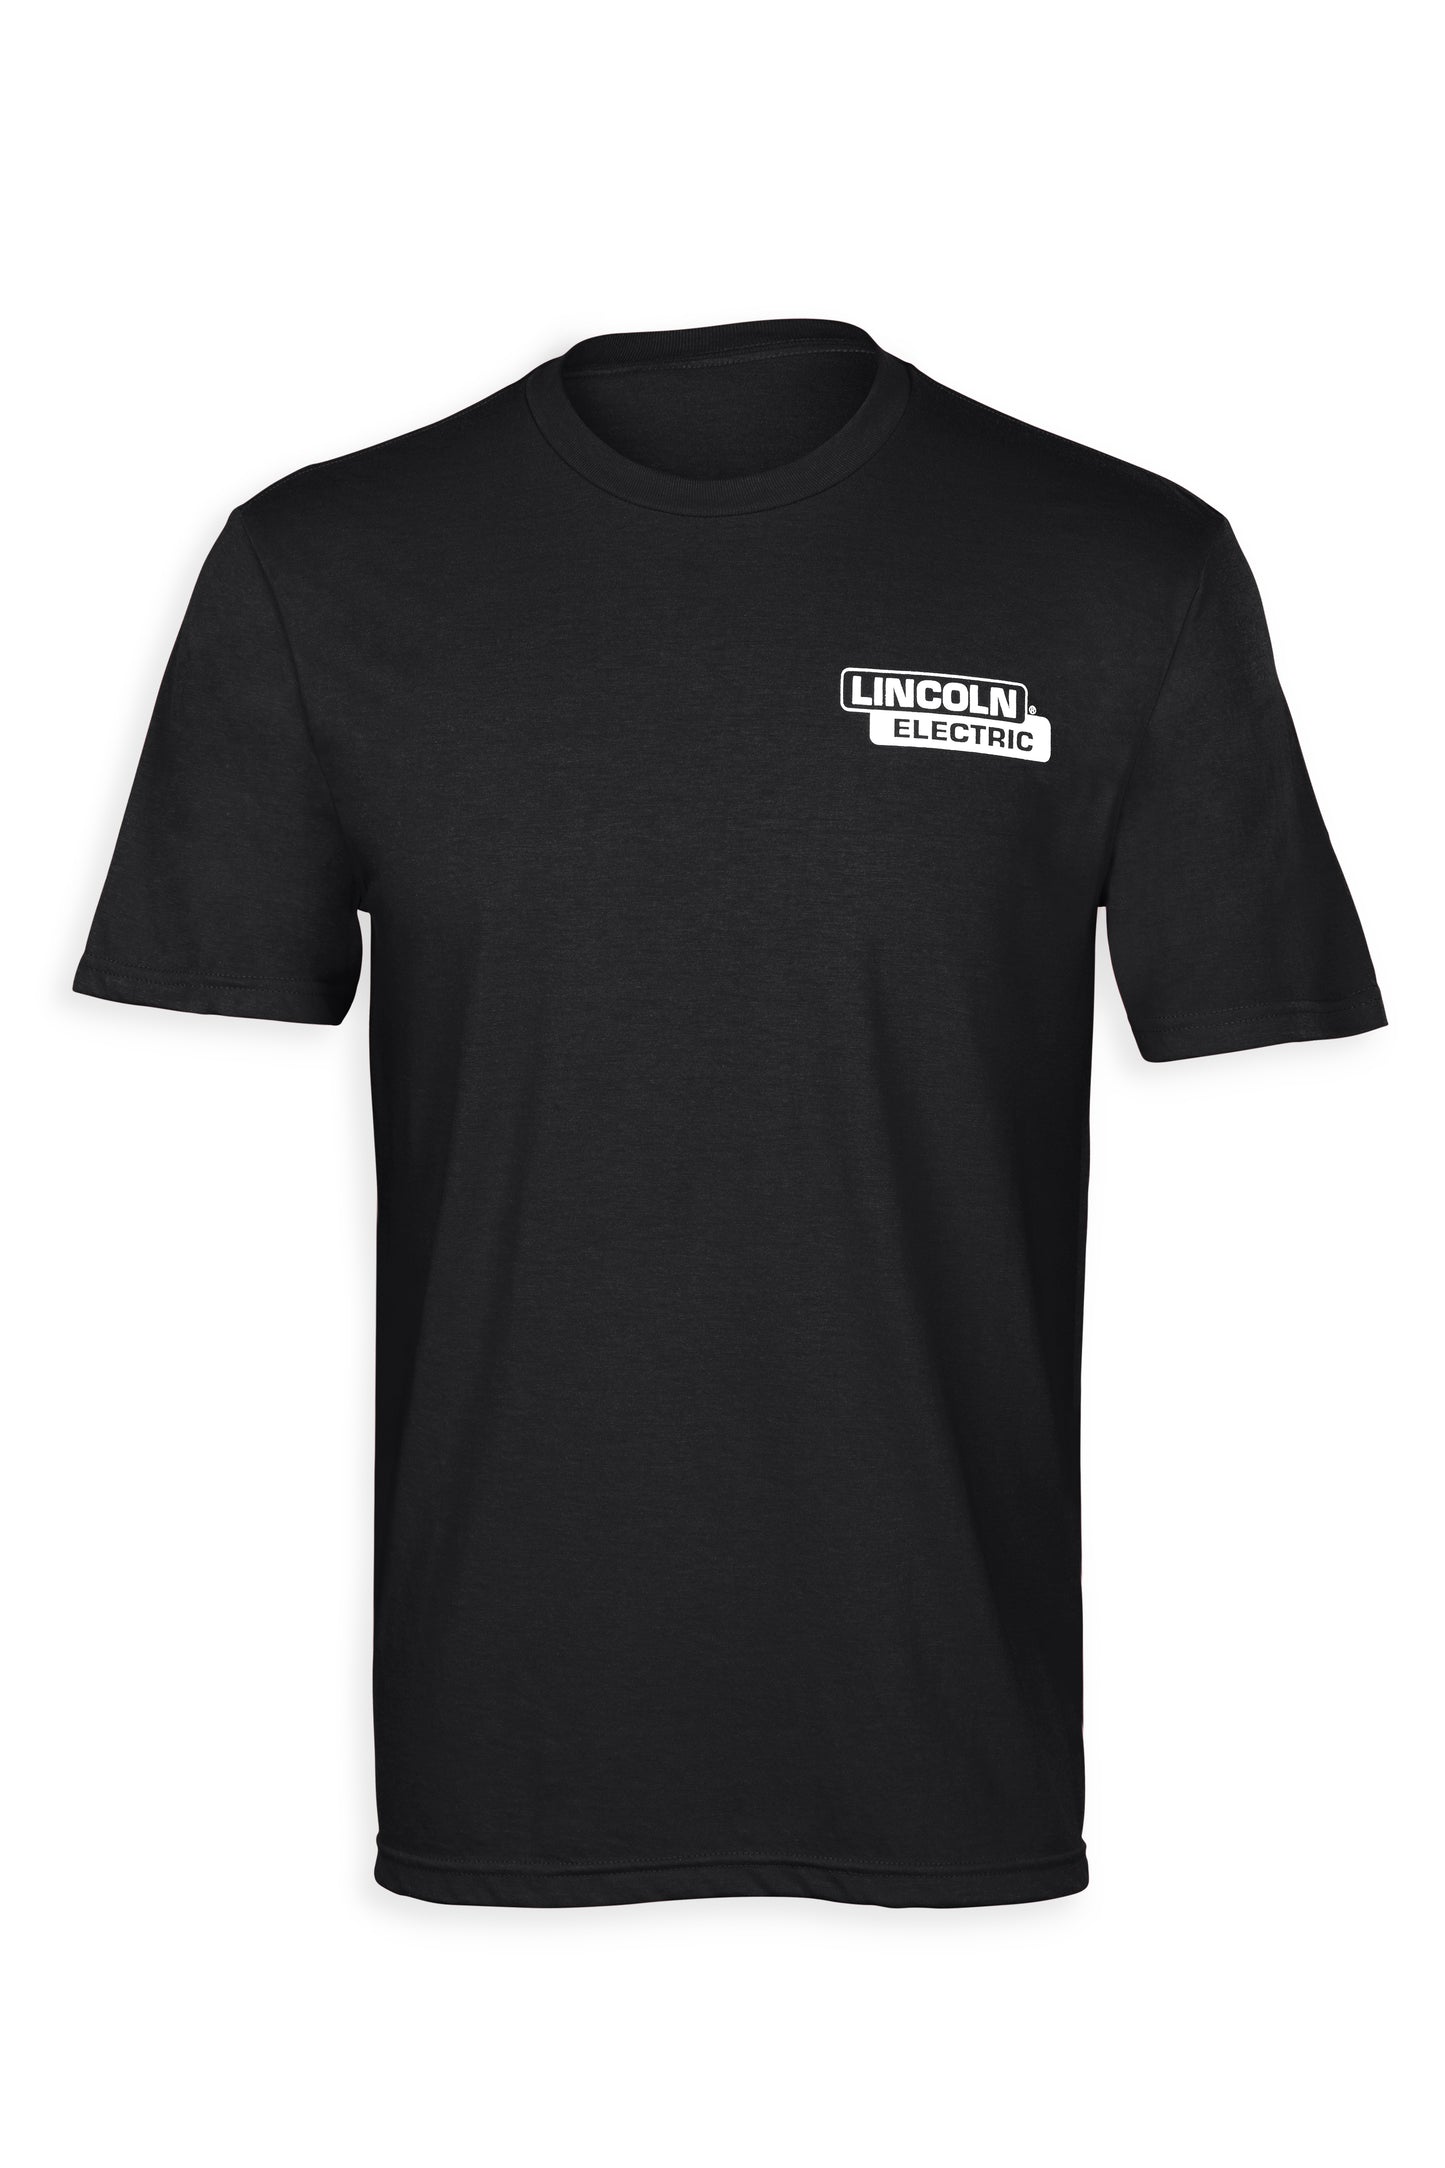 Lincoln Electric Flag T-Shirt